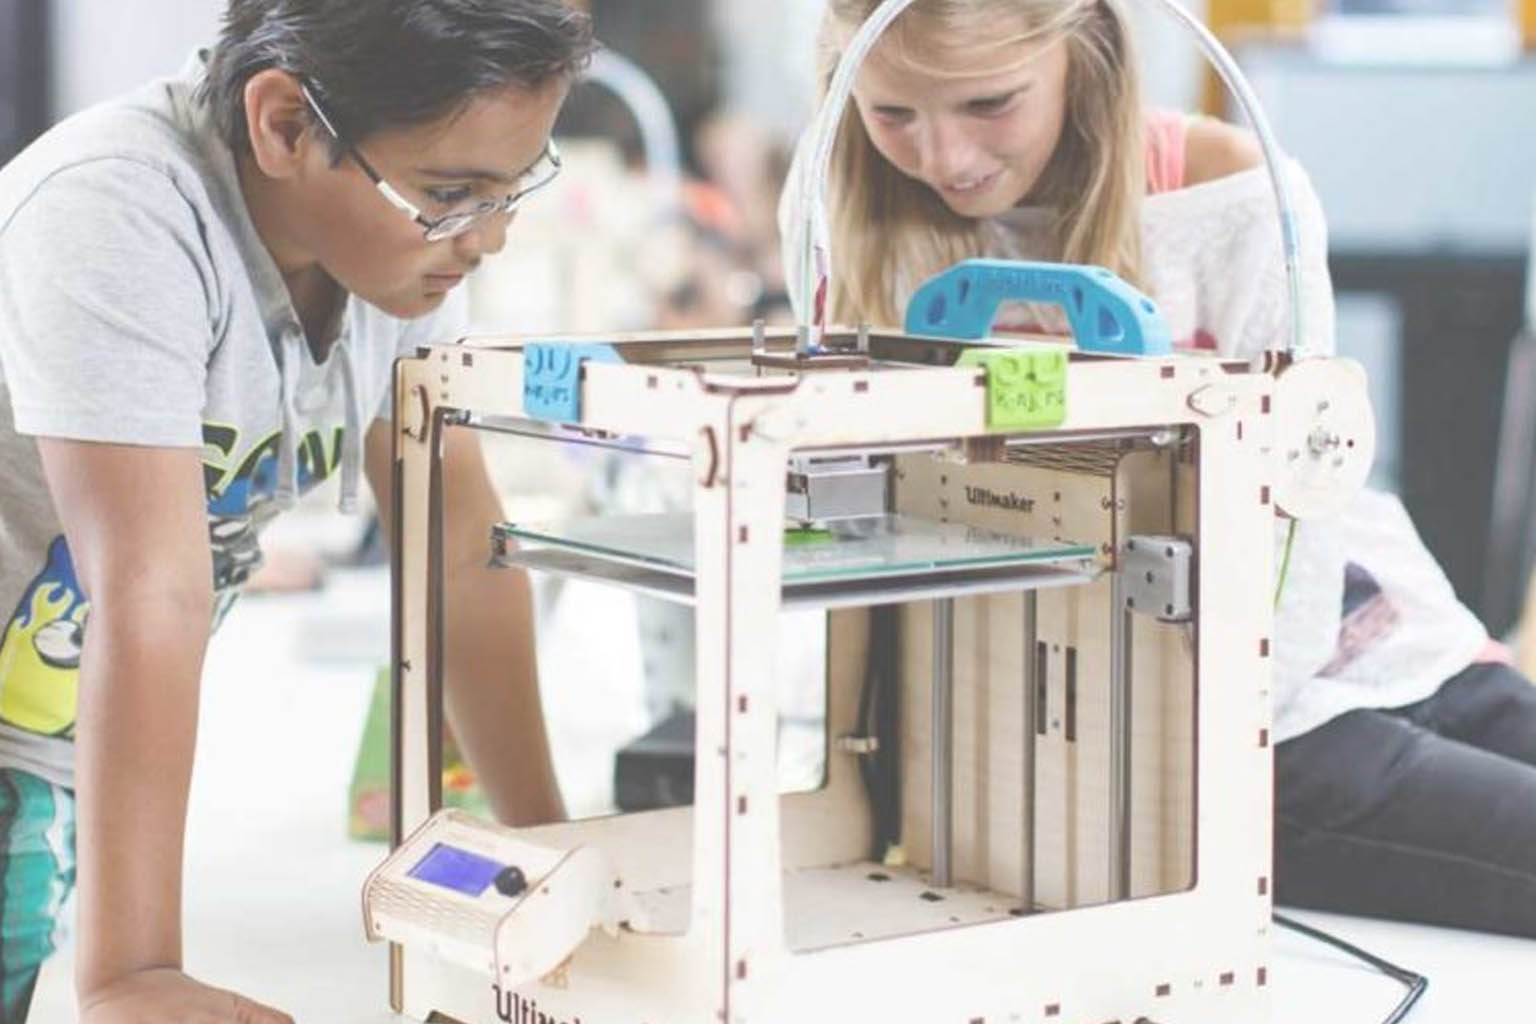 Ultimaker 3D printers in classroom. Photo via CREATE Education Project.